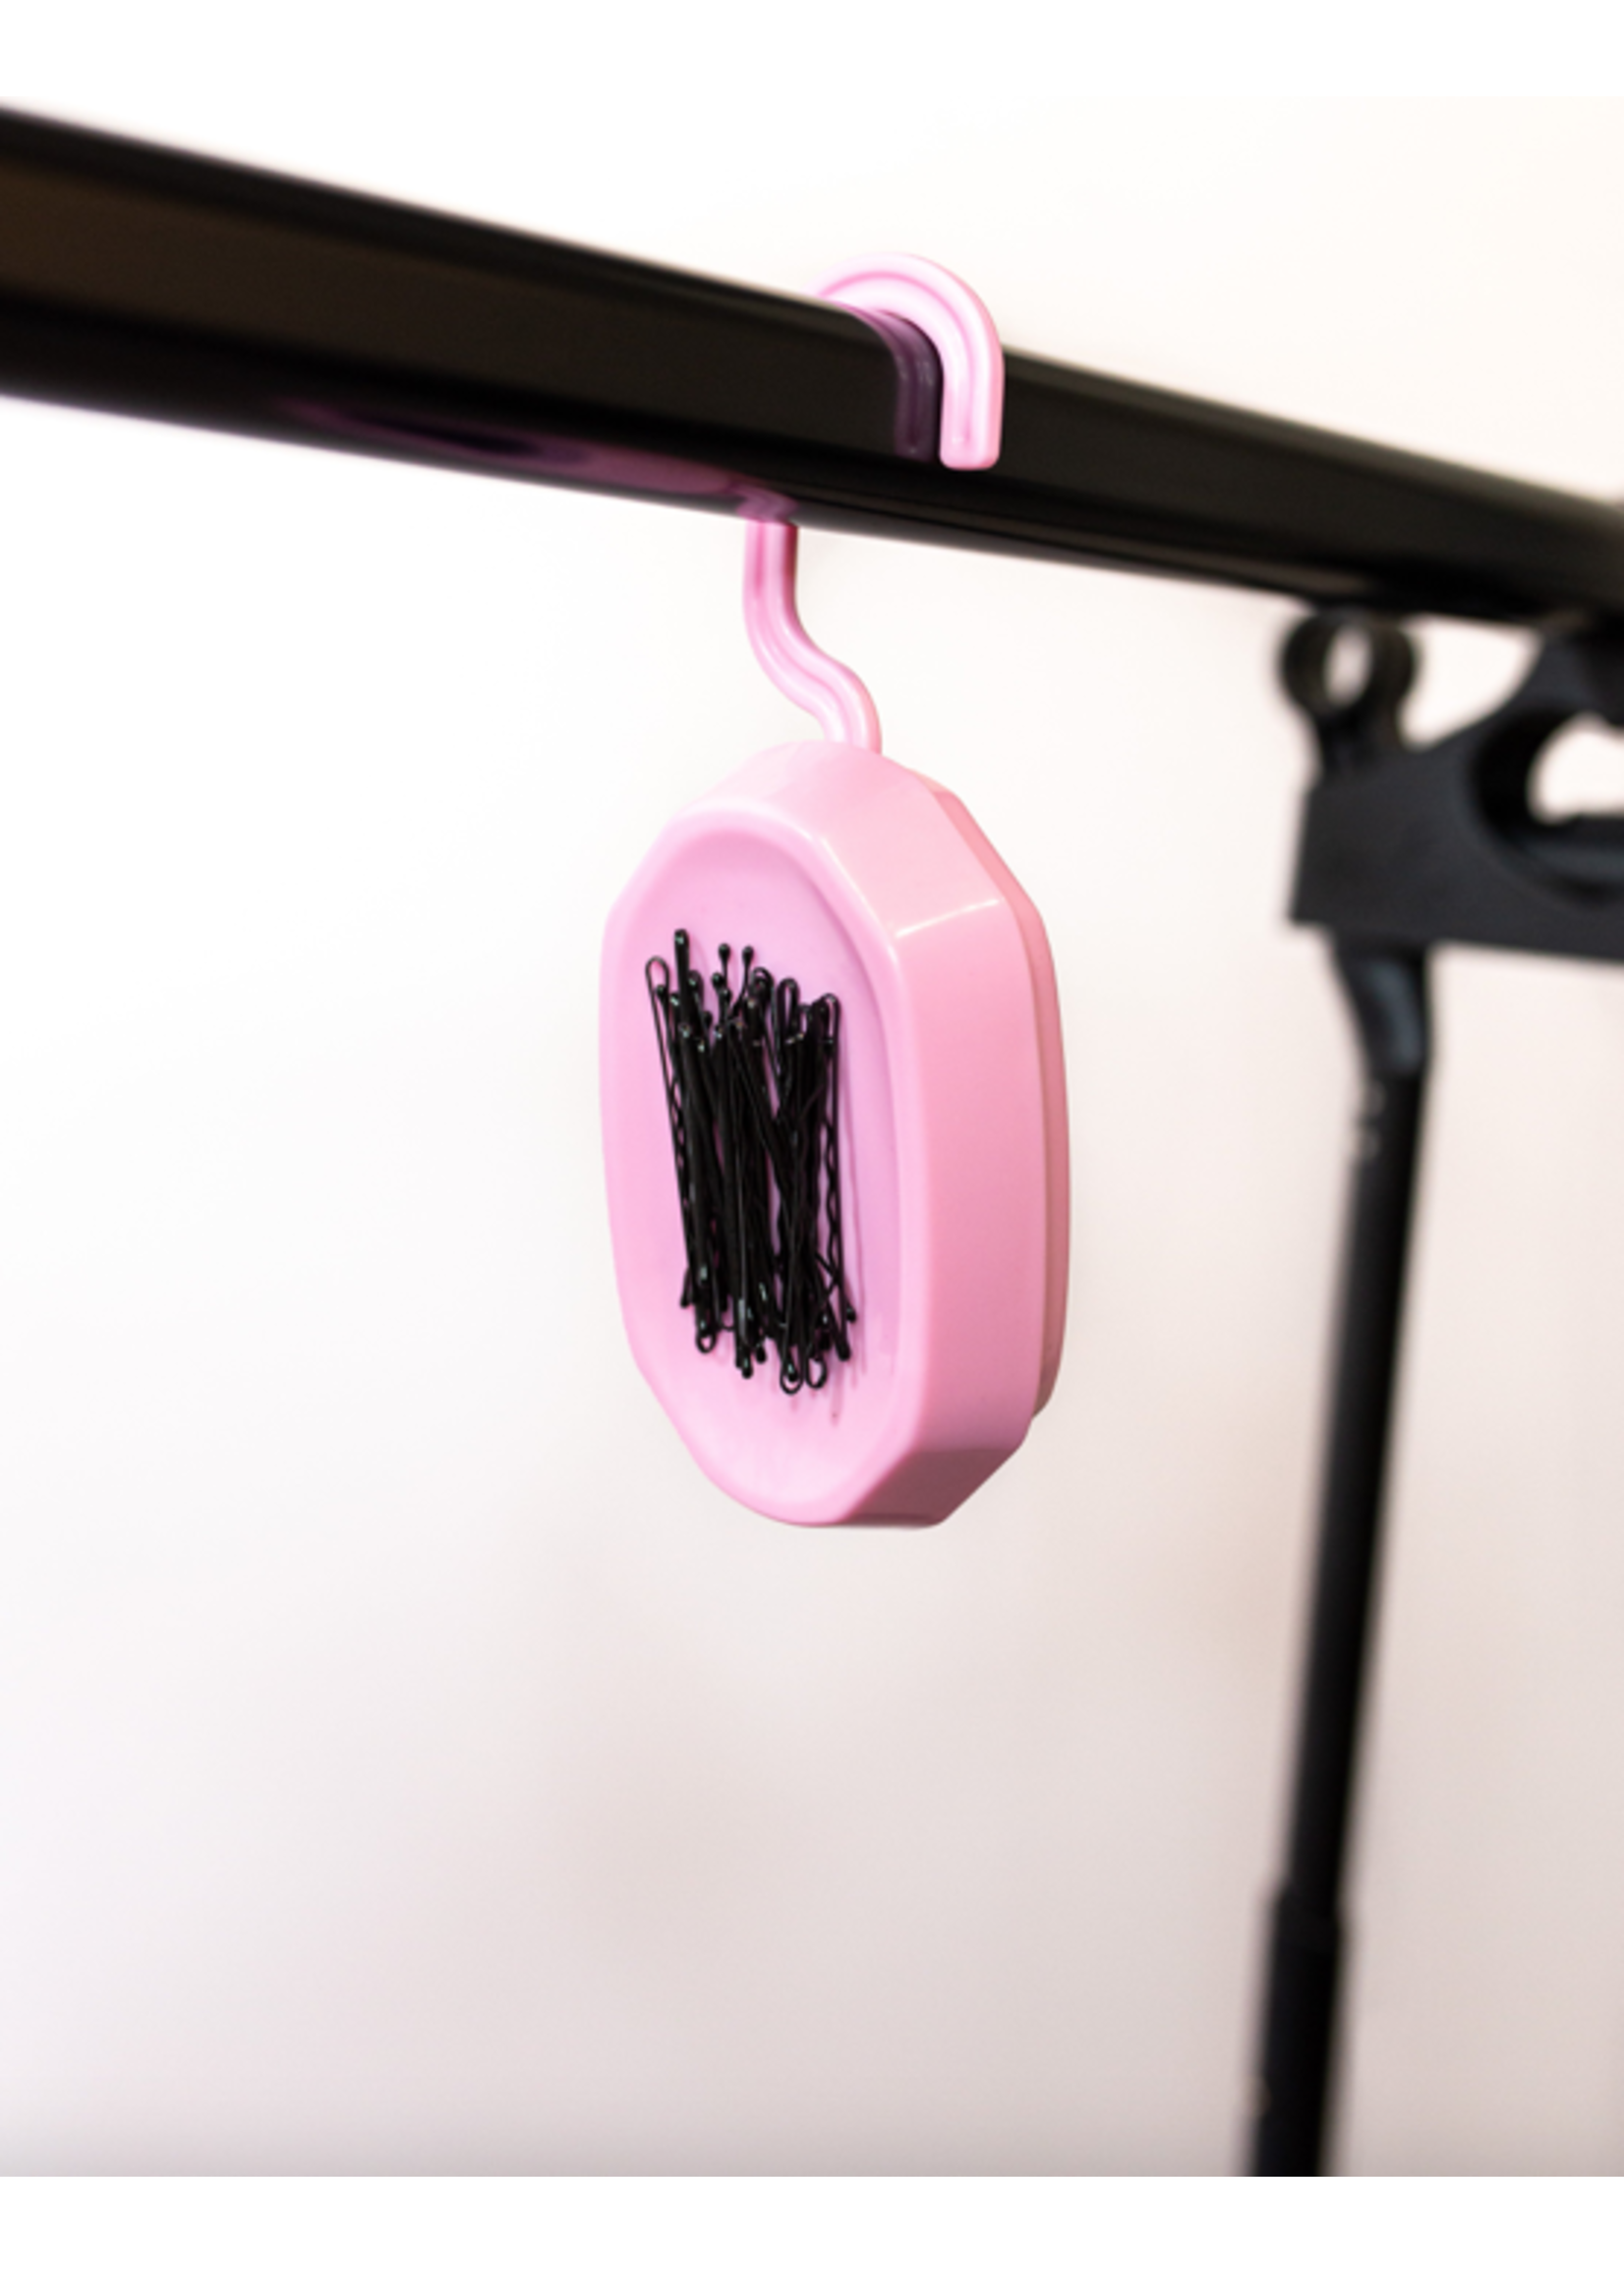 No. More. Lost. Bobby Pins! Our magnetic bobby pin holder holds it dow